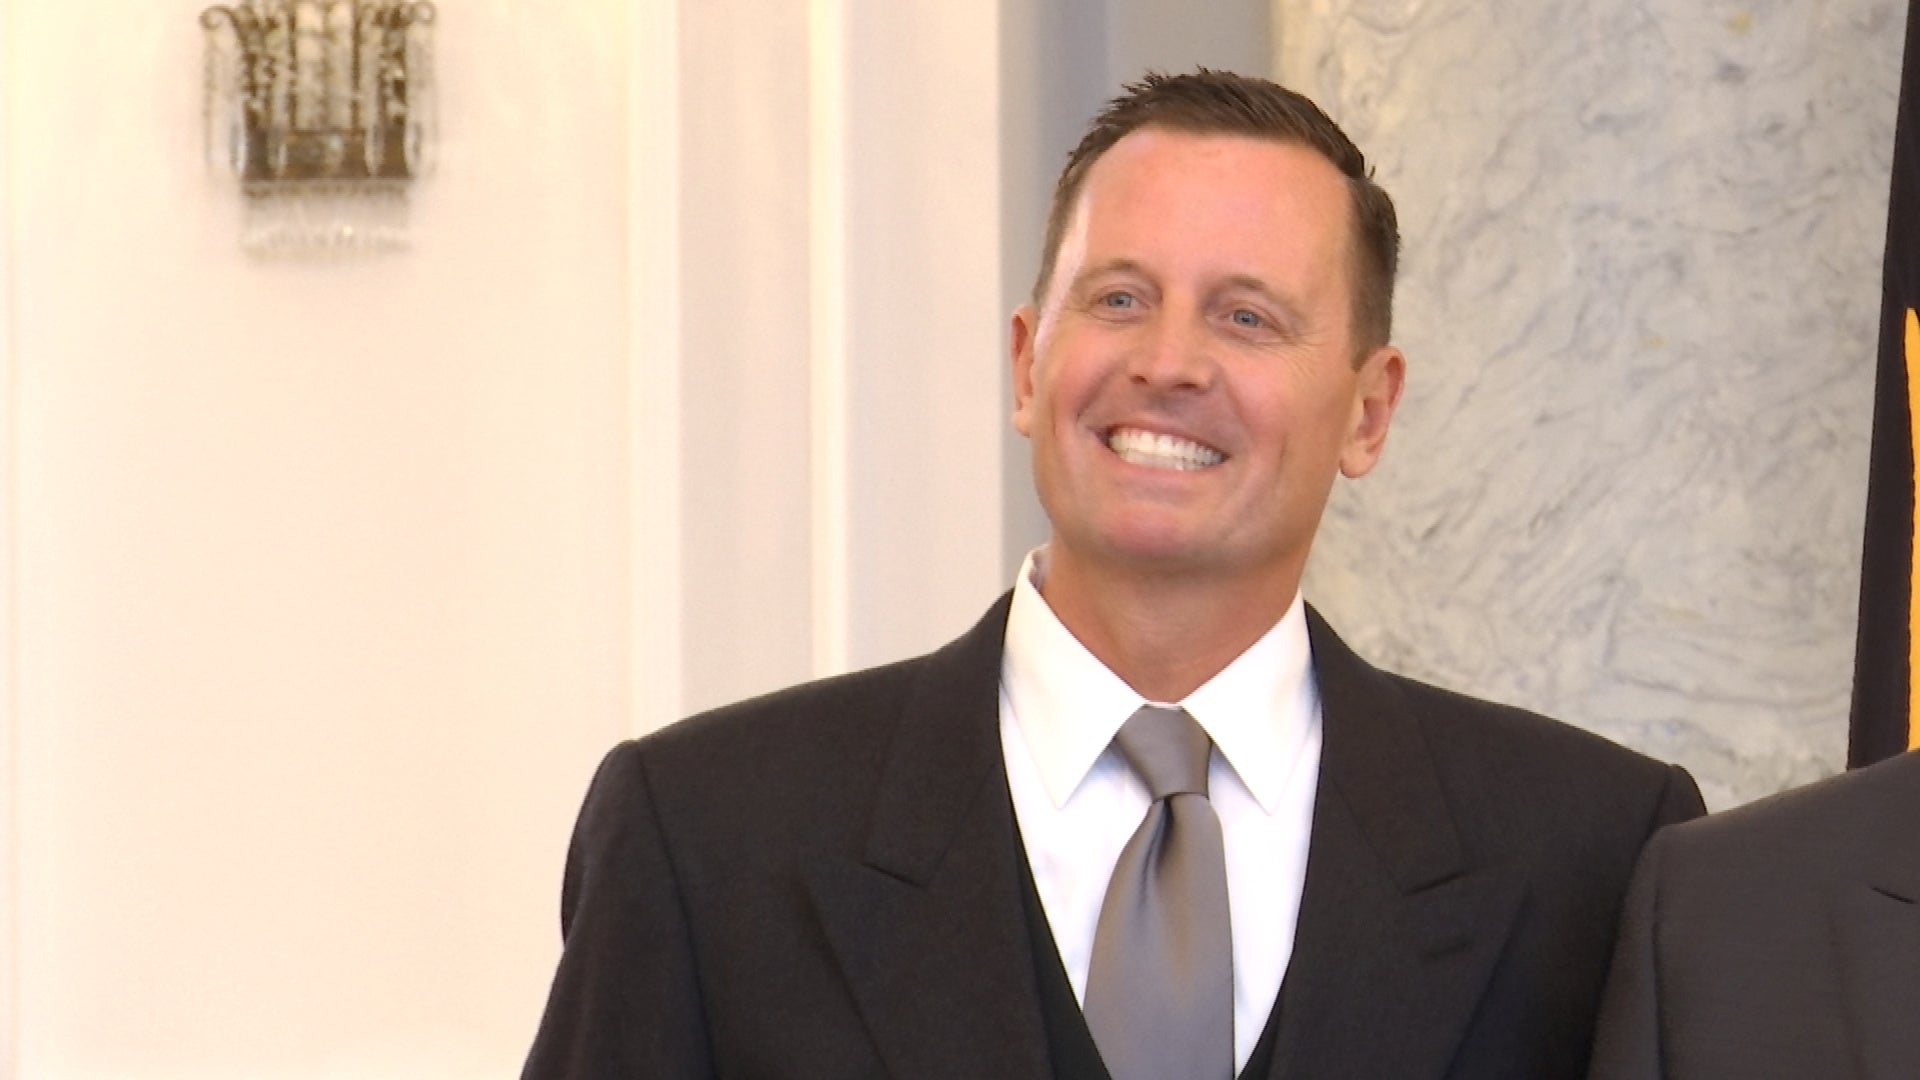 Richard Grenell, the favourite to replace Heather Nauert, who withdrew herself from consideration, was also a Fox News contributor